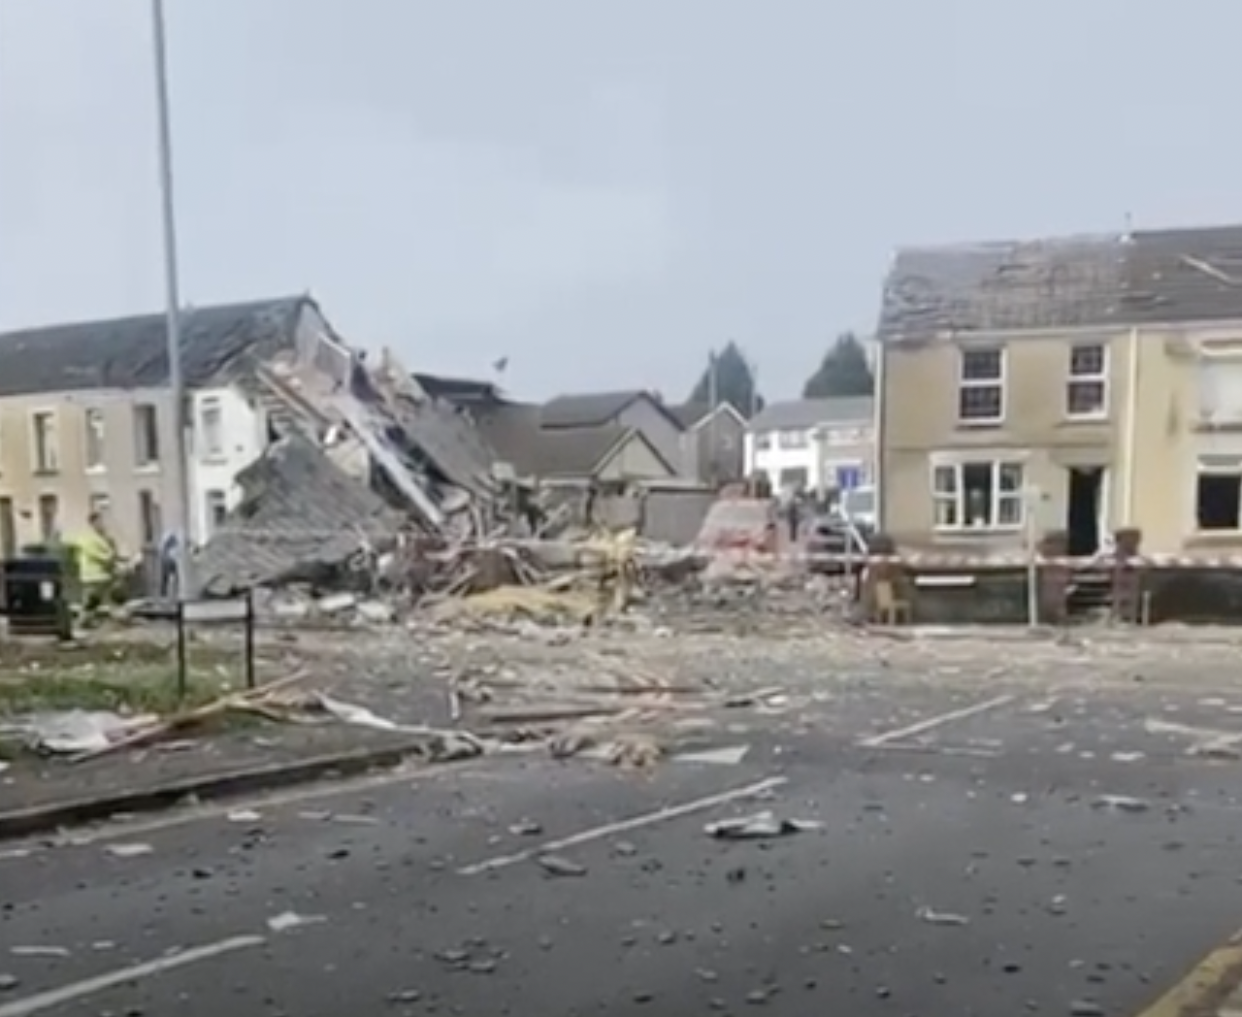 Damage to houses in Morriston, Swansea after a gas explosion (Alex Novovic)